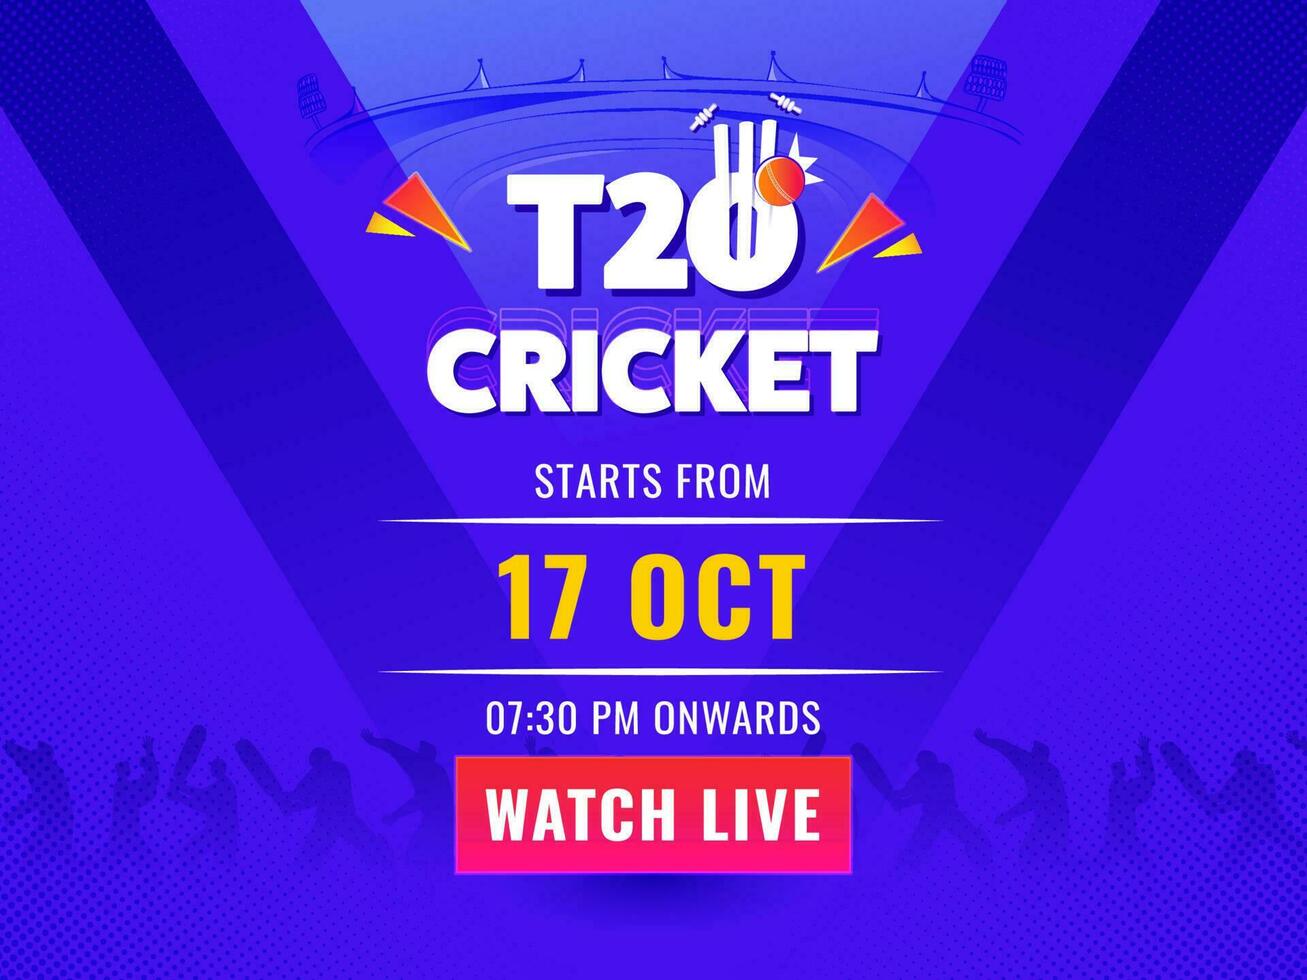 T20 Cricket Watch Live Poster Design With Silhouette Cricketer Players On Violet Background. vector